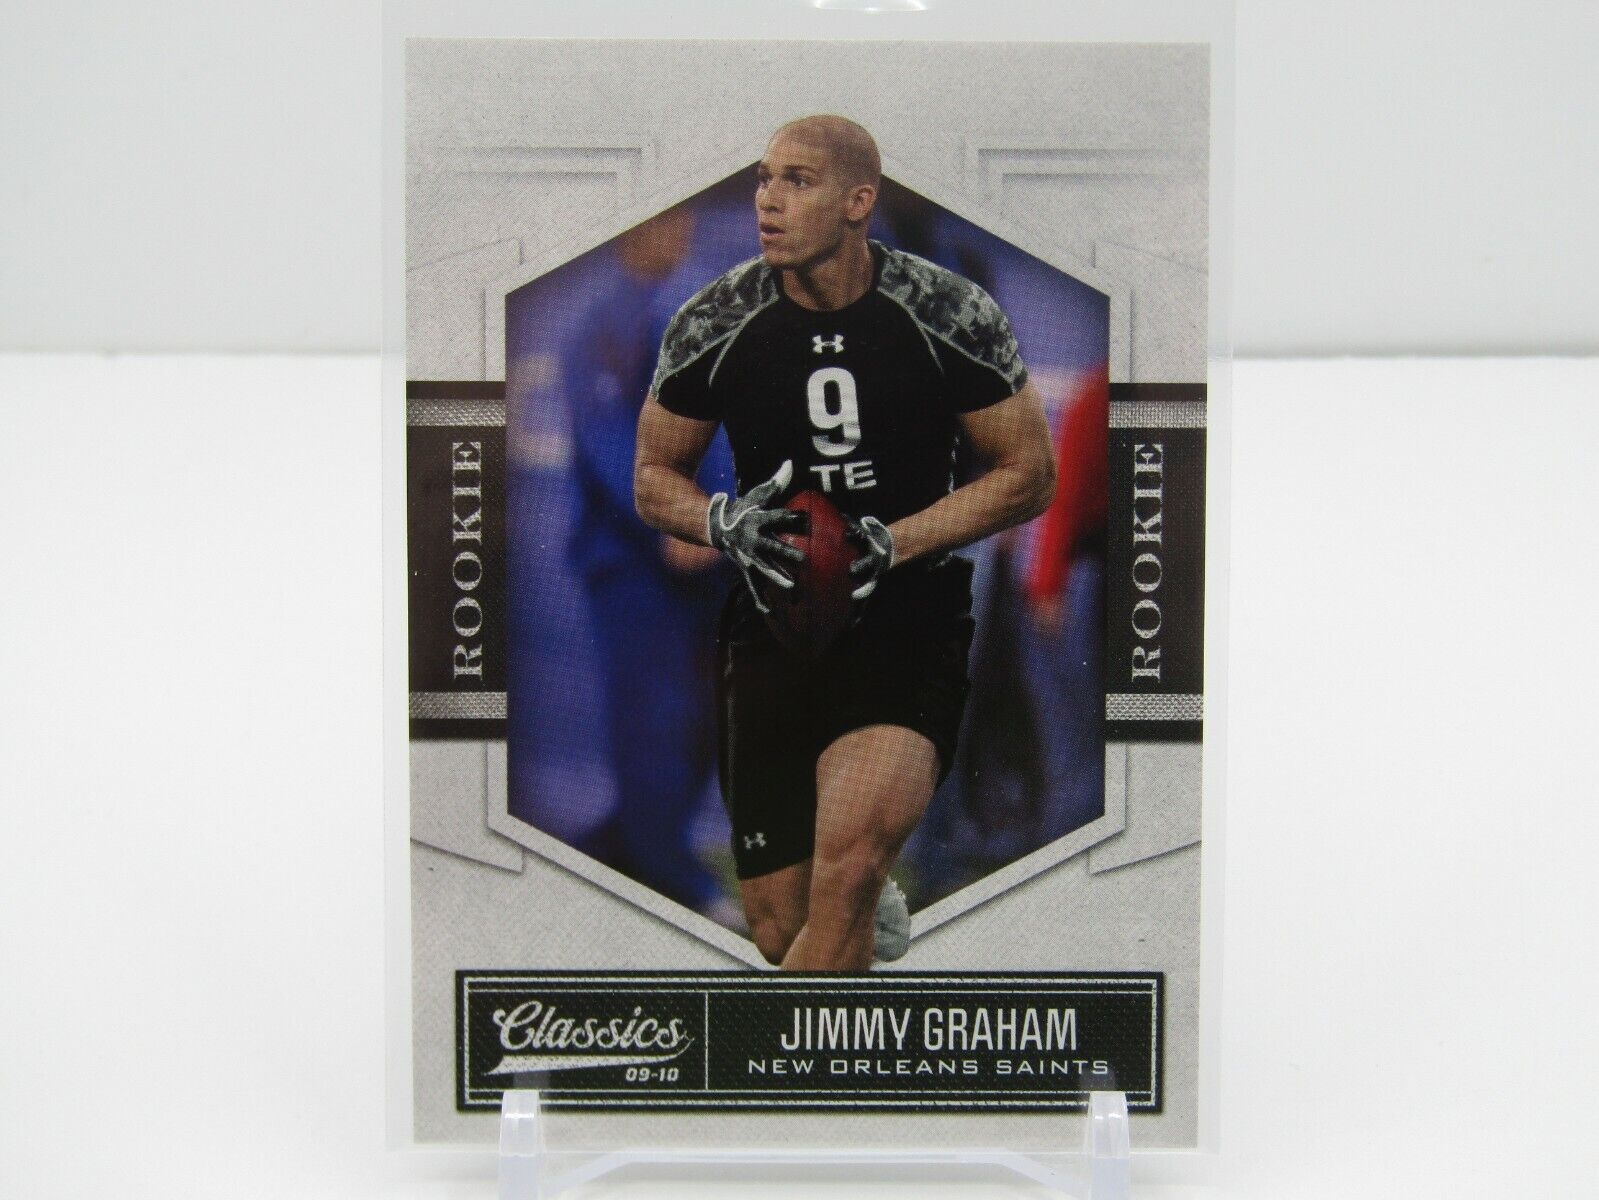 JIMMY GRAHAM 2009-10 CLASSICS ROOKIE CARD! RC! #885/999! NEW ORLEANS SAINTS! . rookie card picture